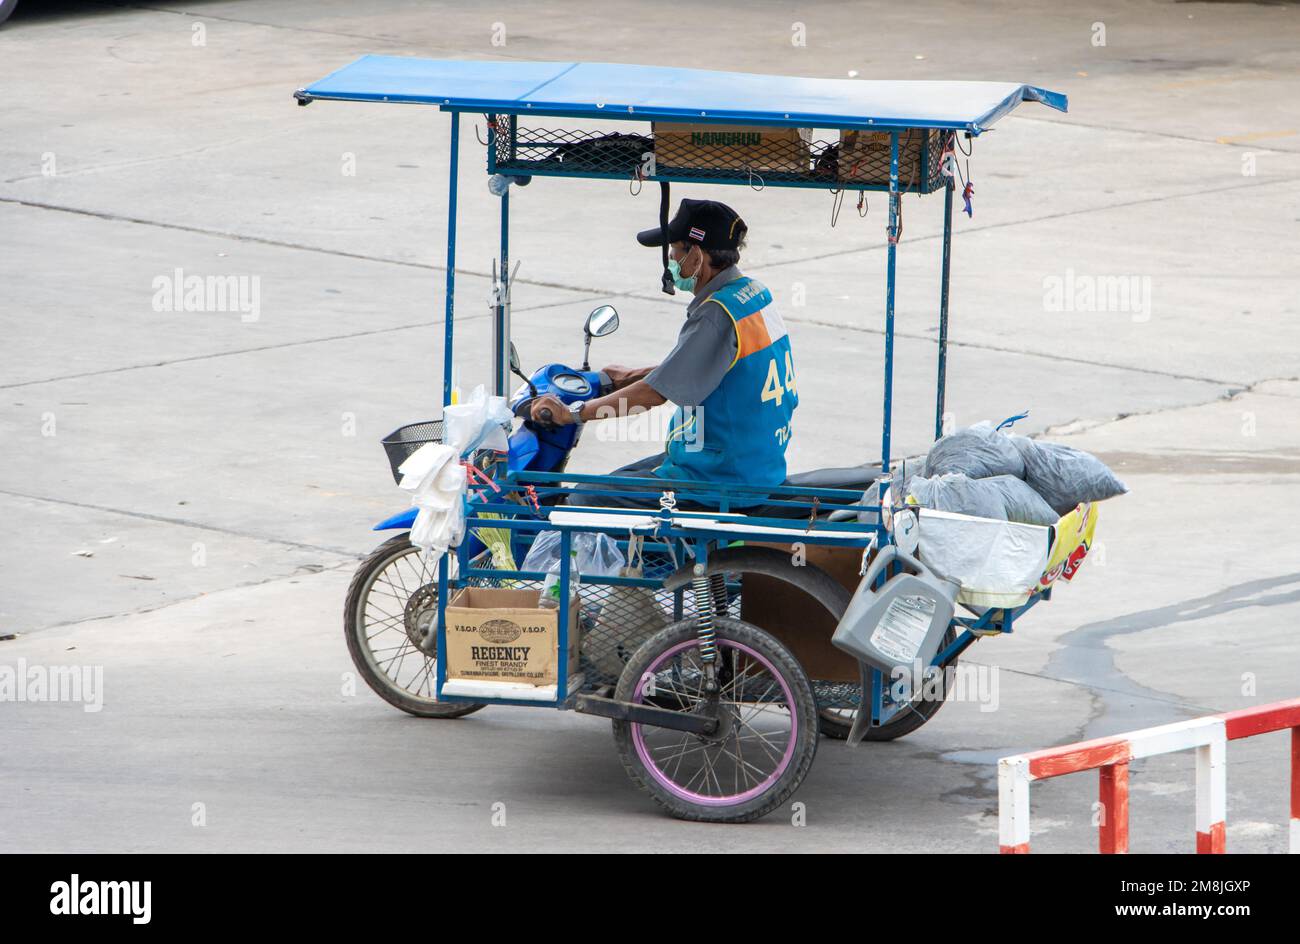 SAMUT PRAKAN, THAILAND, MARCH 02 2022, Mototaxi driver with a sidecar ride on the street Stock Photo